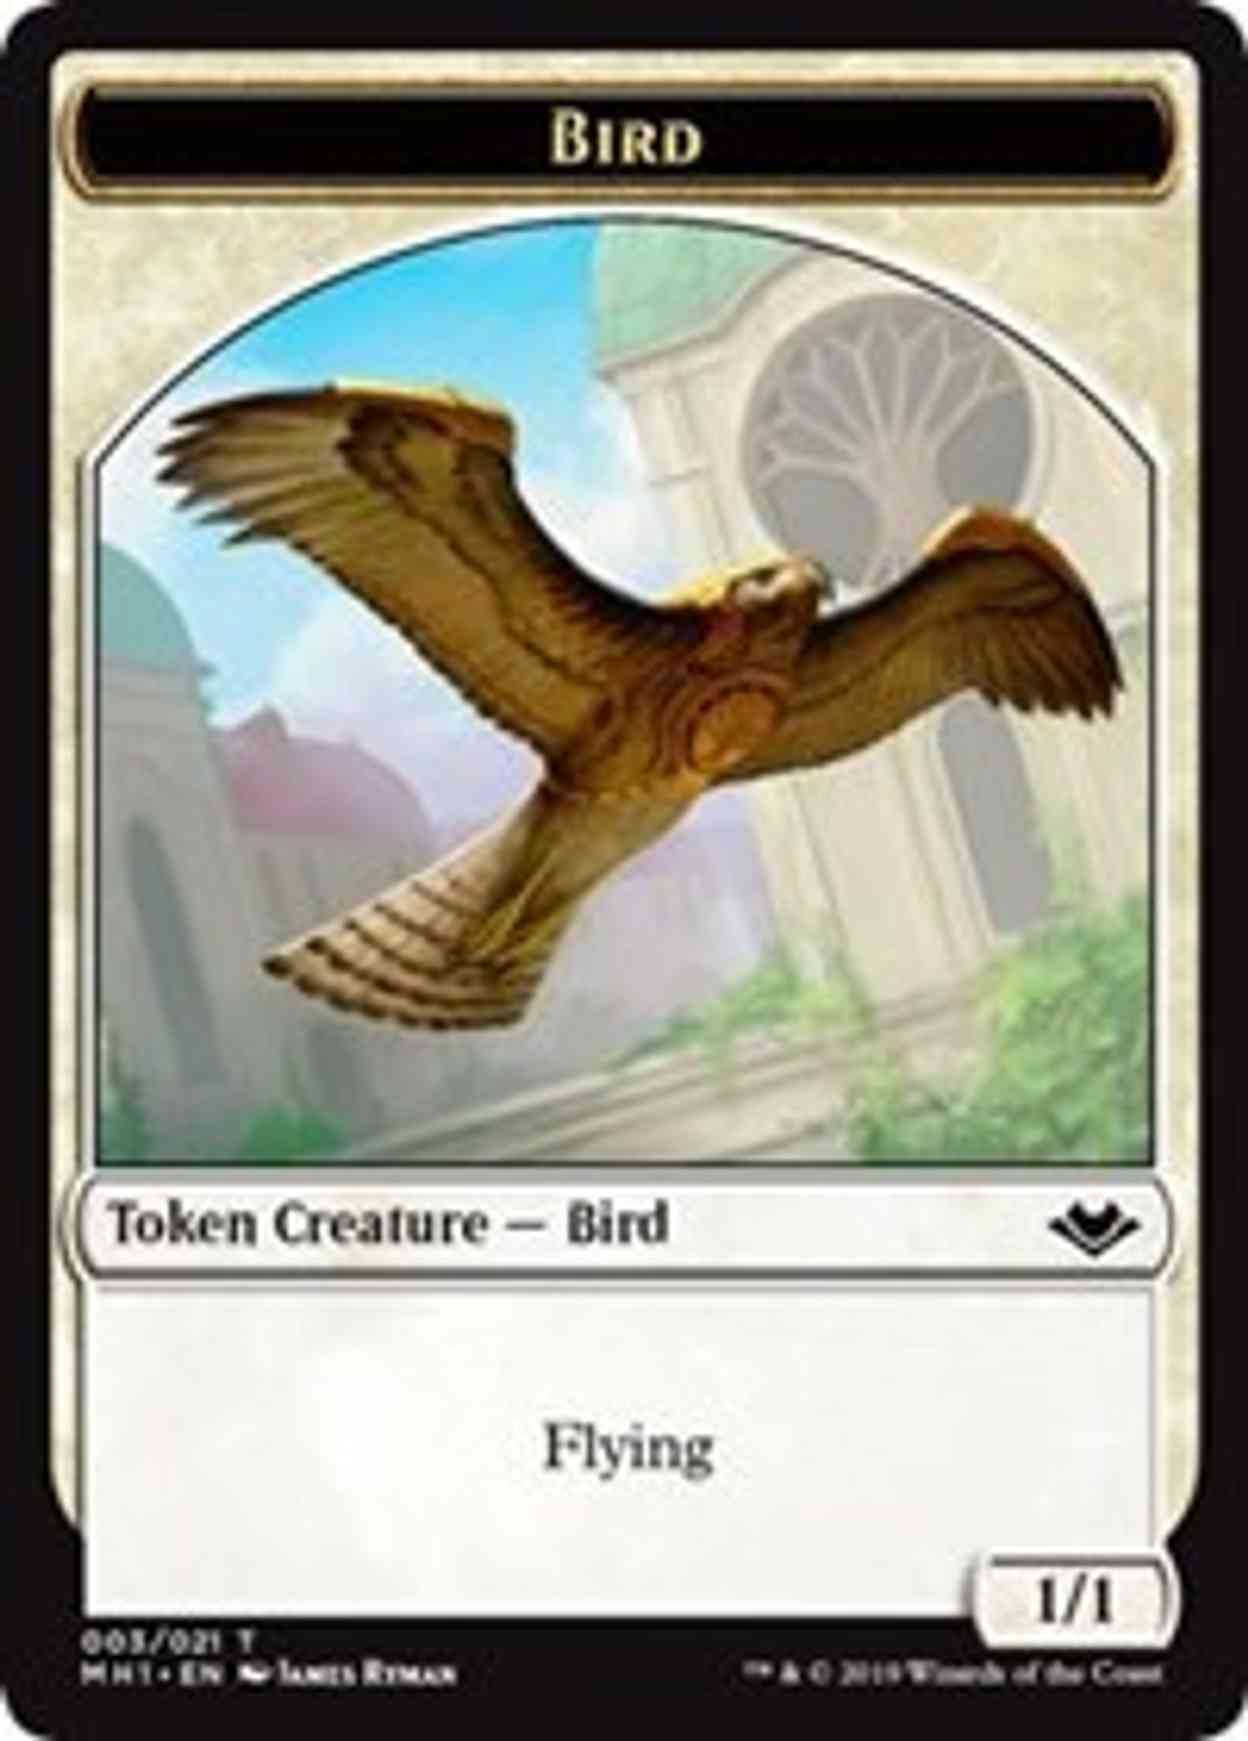 Bird (003) // Elemental (009) Double-sided Token magic card front